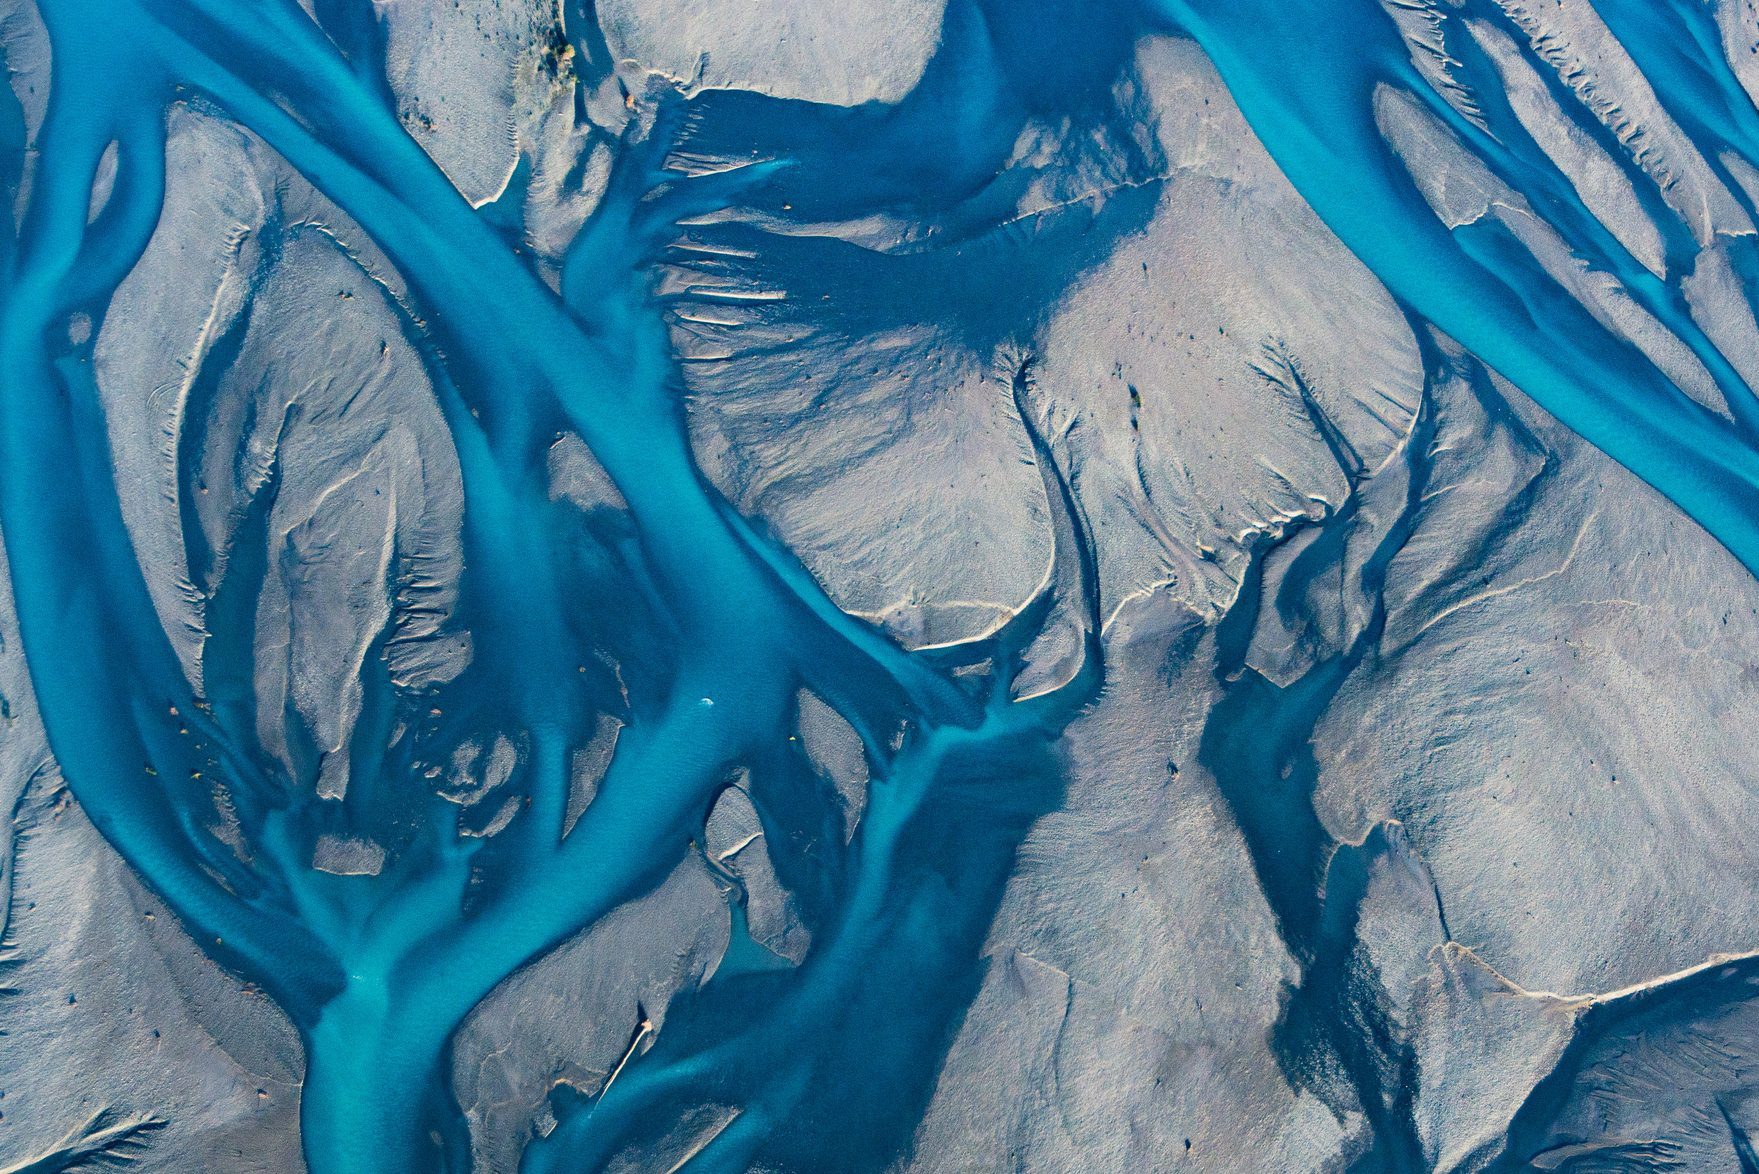 Amazing braided rivers in New Zealand from a plane